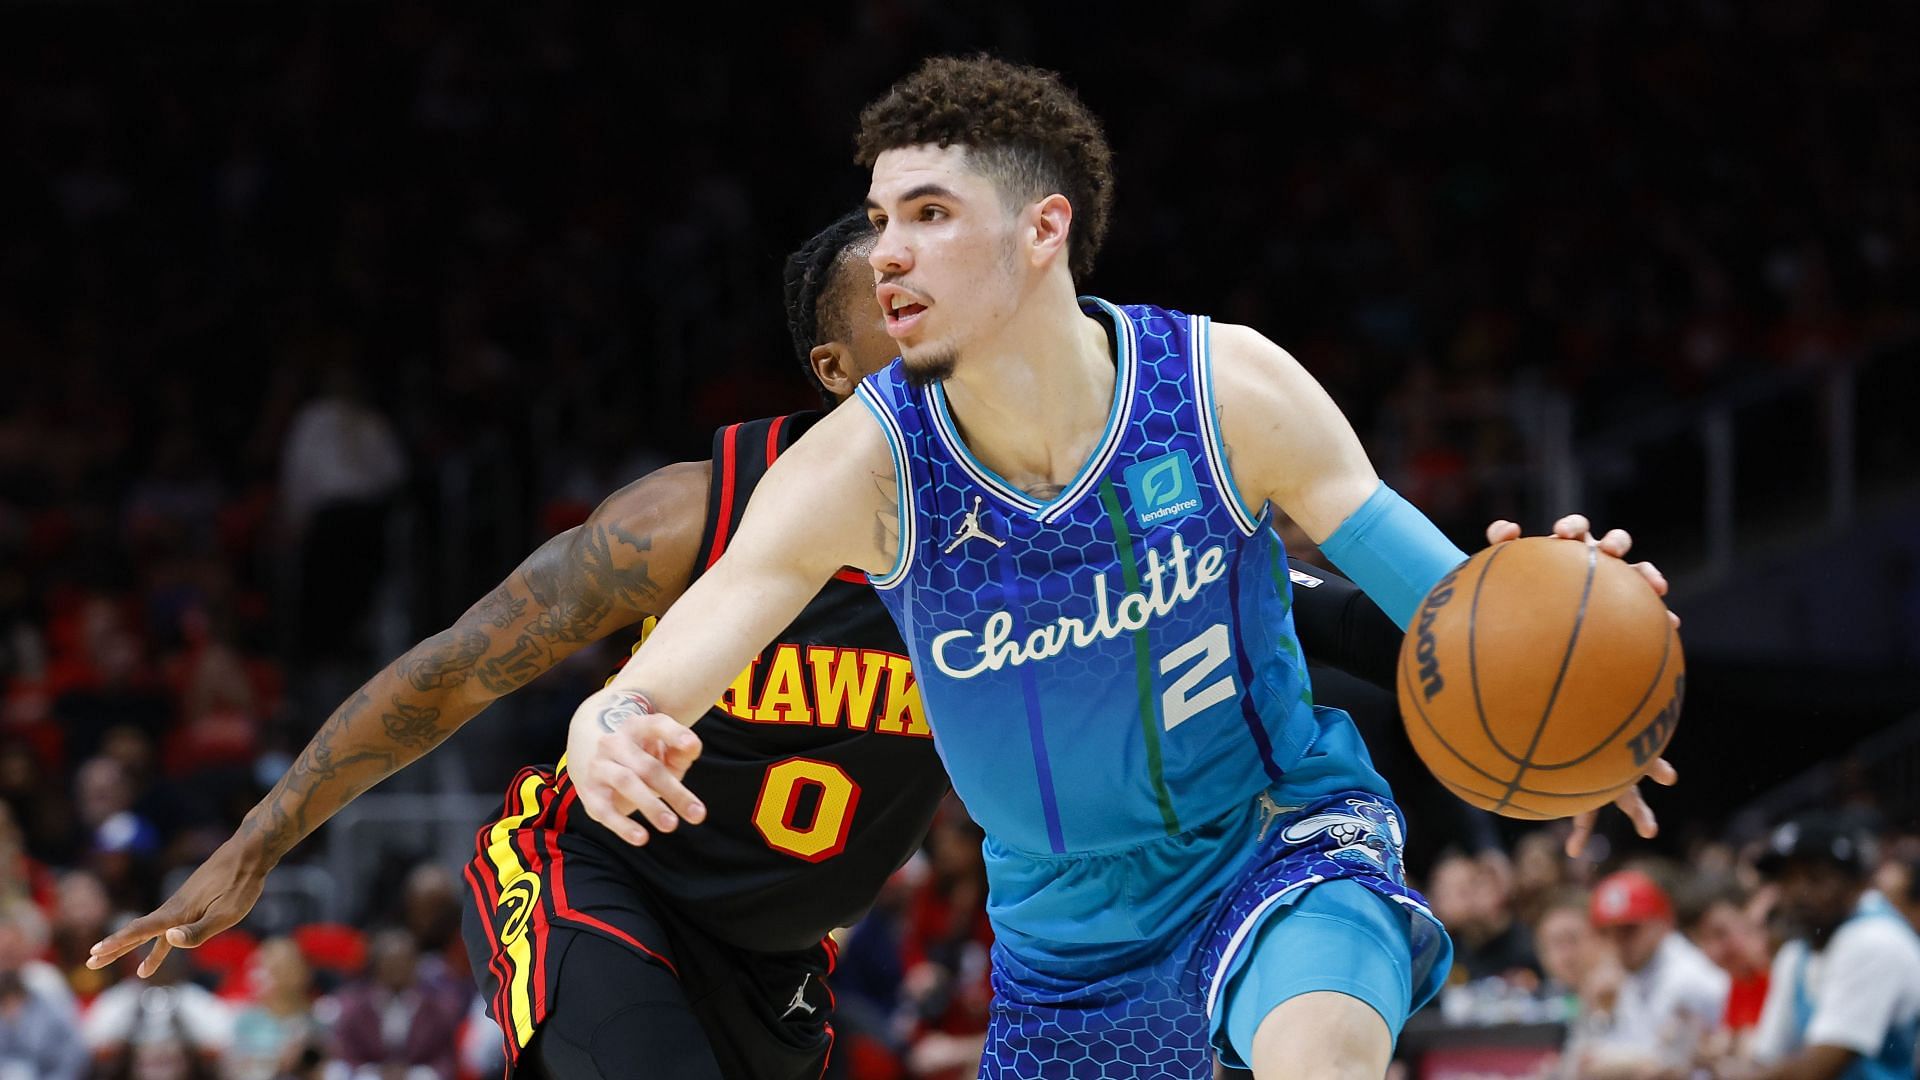 LaMelo Ball of the Charlotte Hornets.